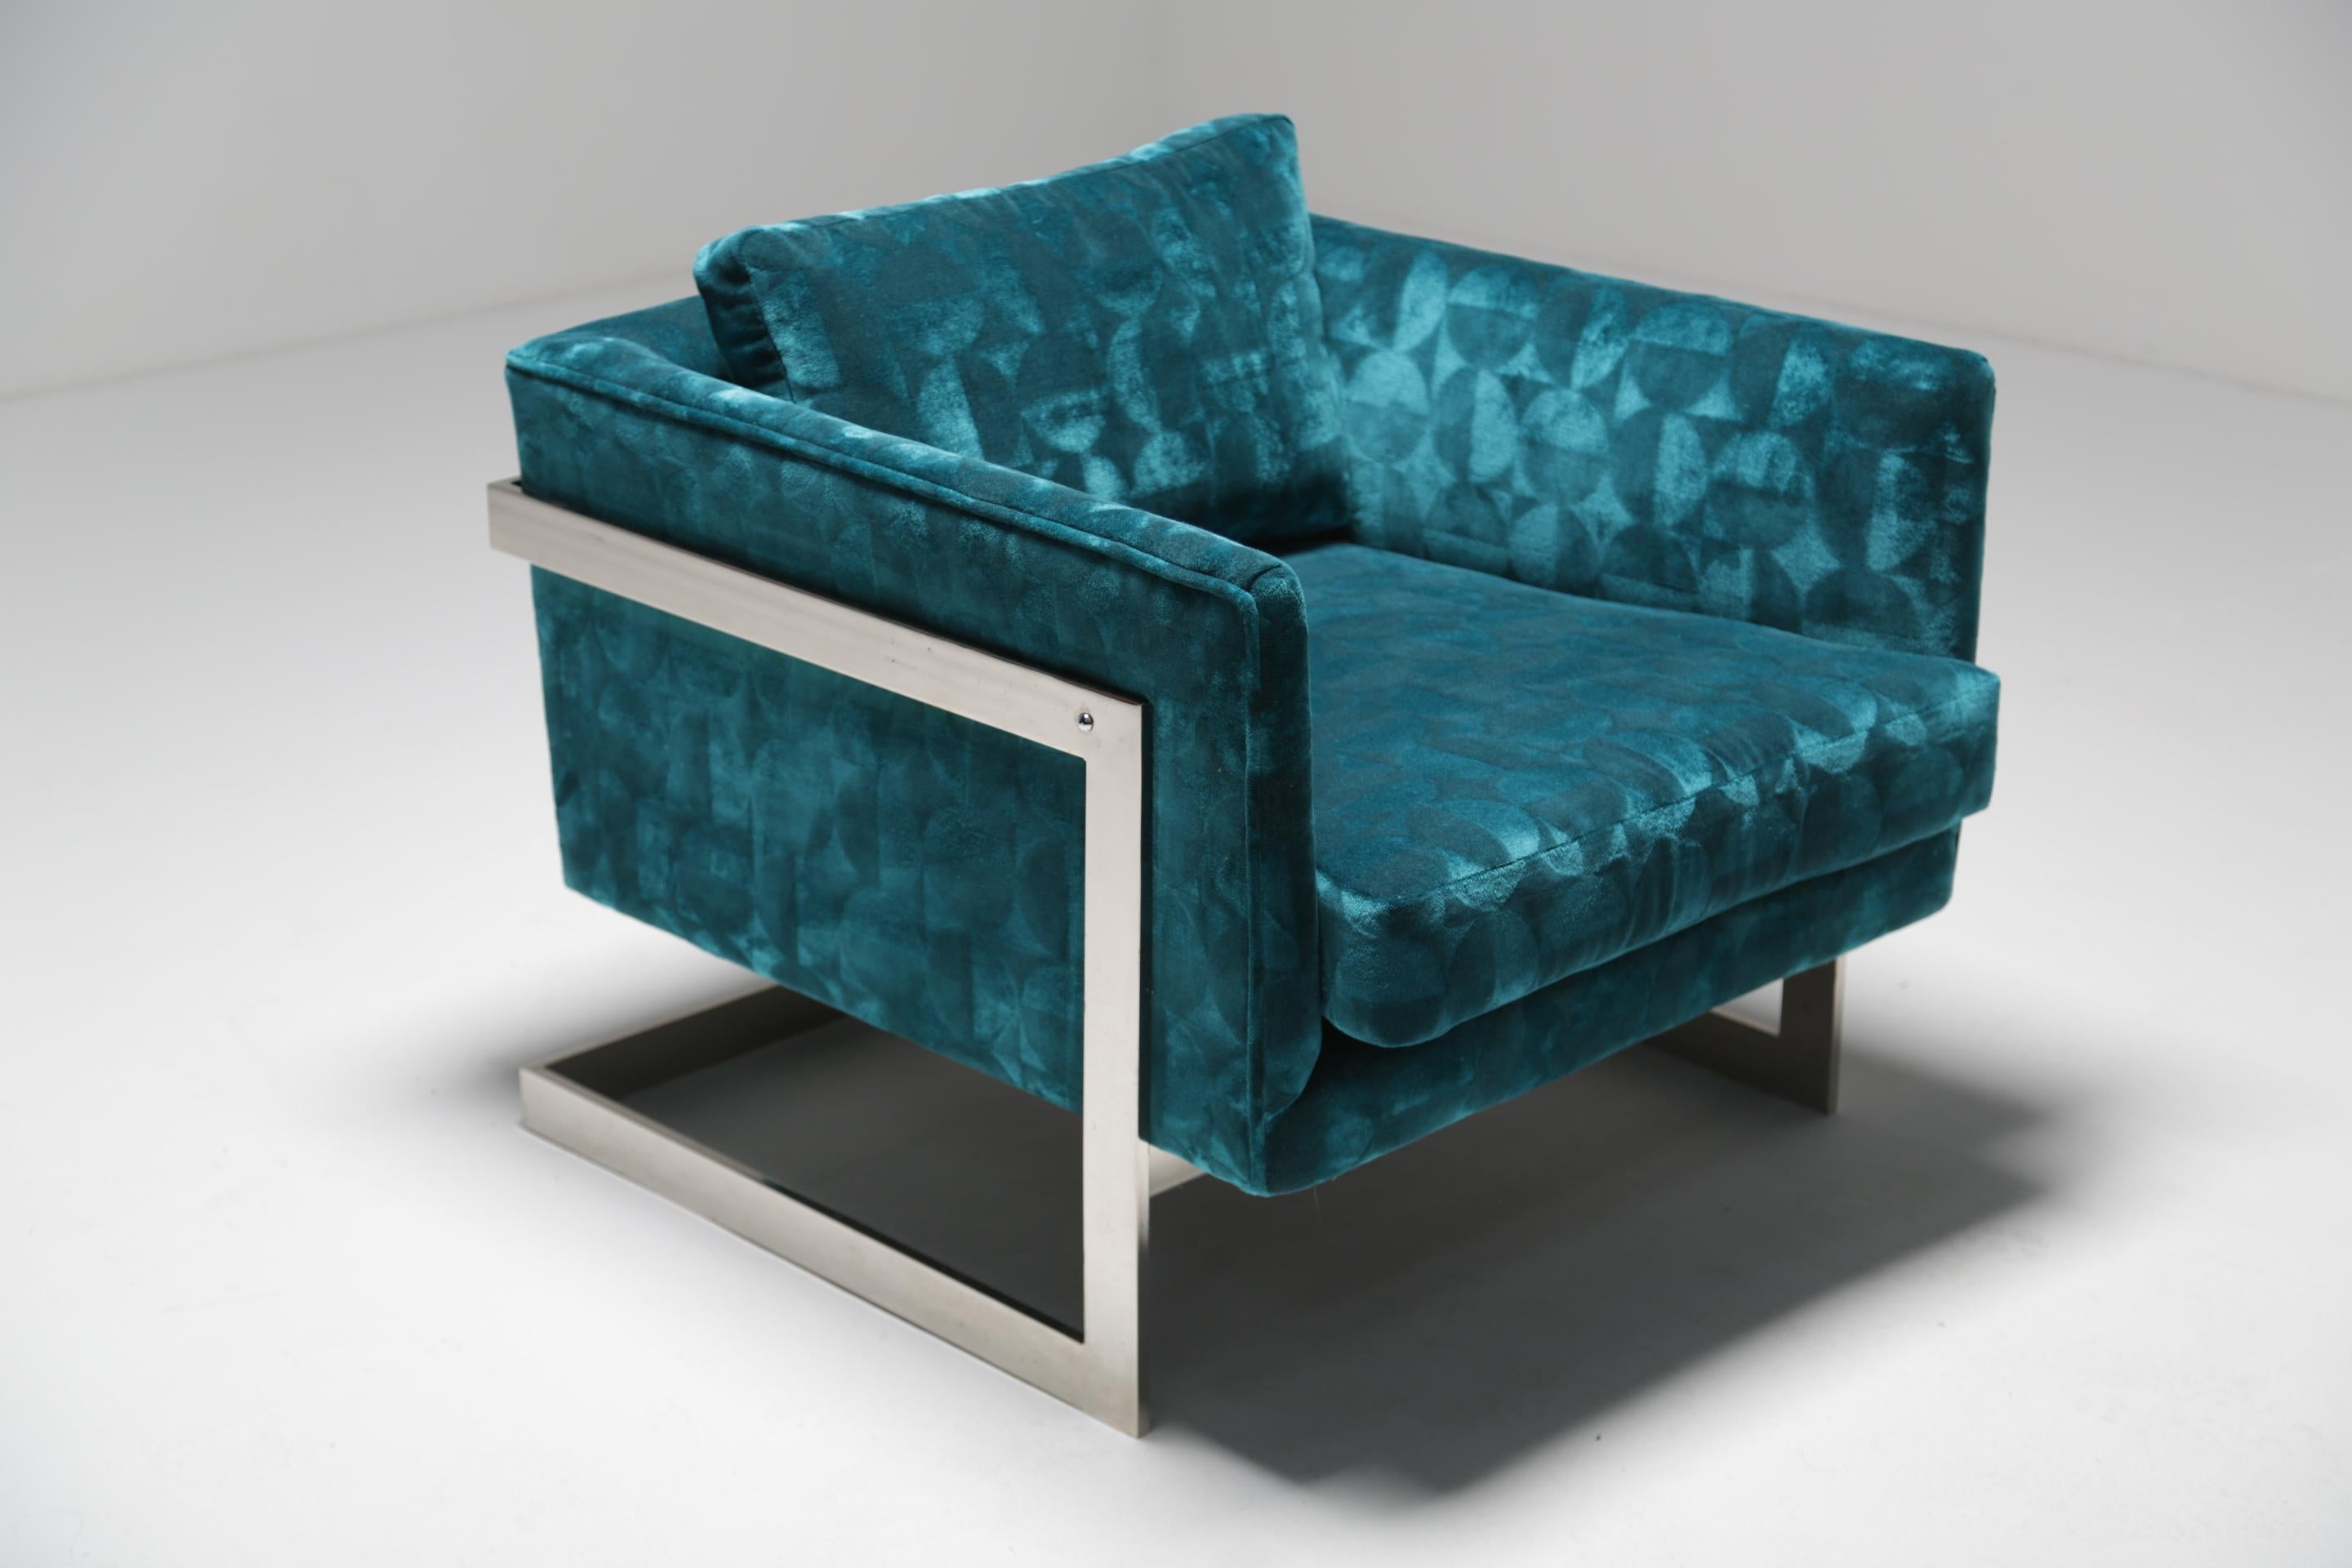 Offered here is the larger size of the now famous Milo Baughman floating cube lounge chair. This chair was designed by Milo Baughman and produced by Thayer Coggin sometime in the early 1970s. We have recently recovered this piece in a patterned teal